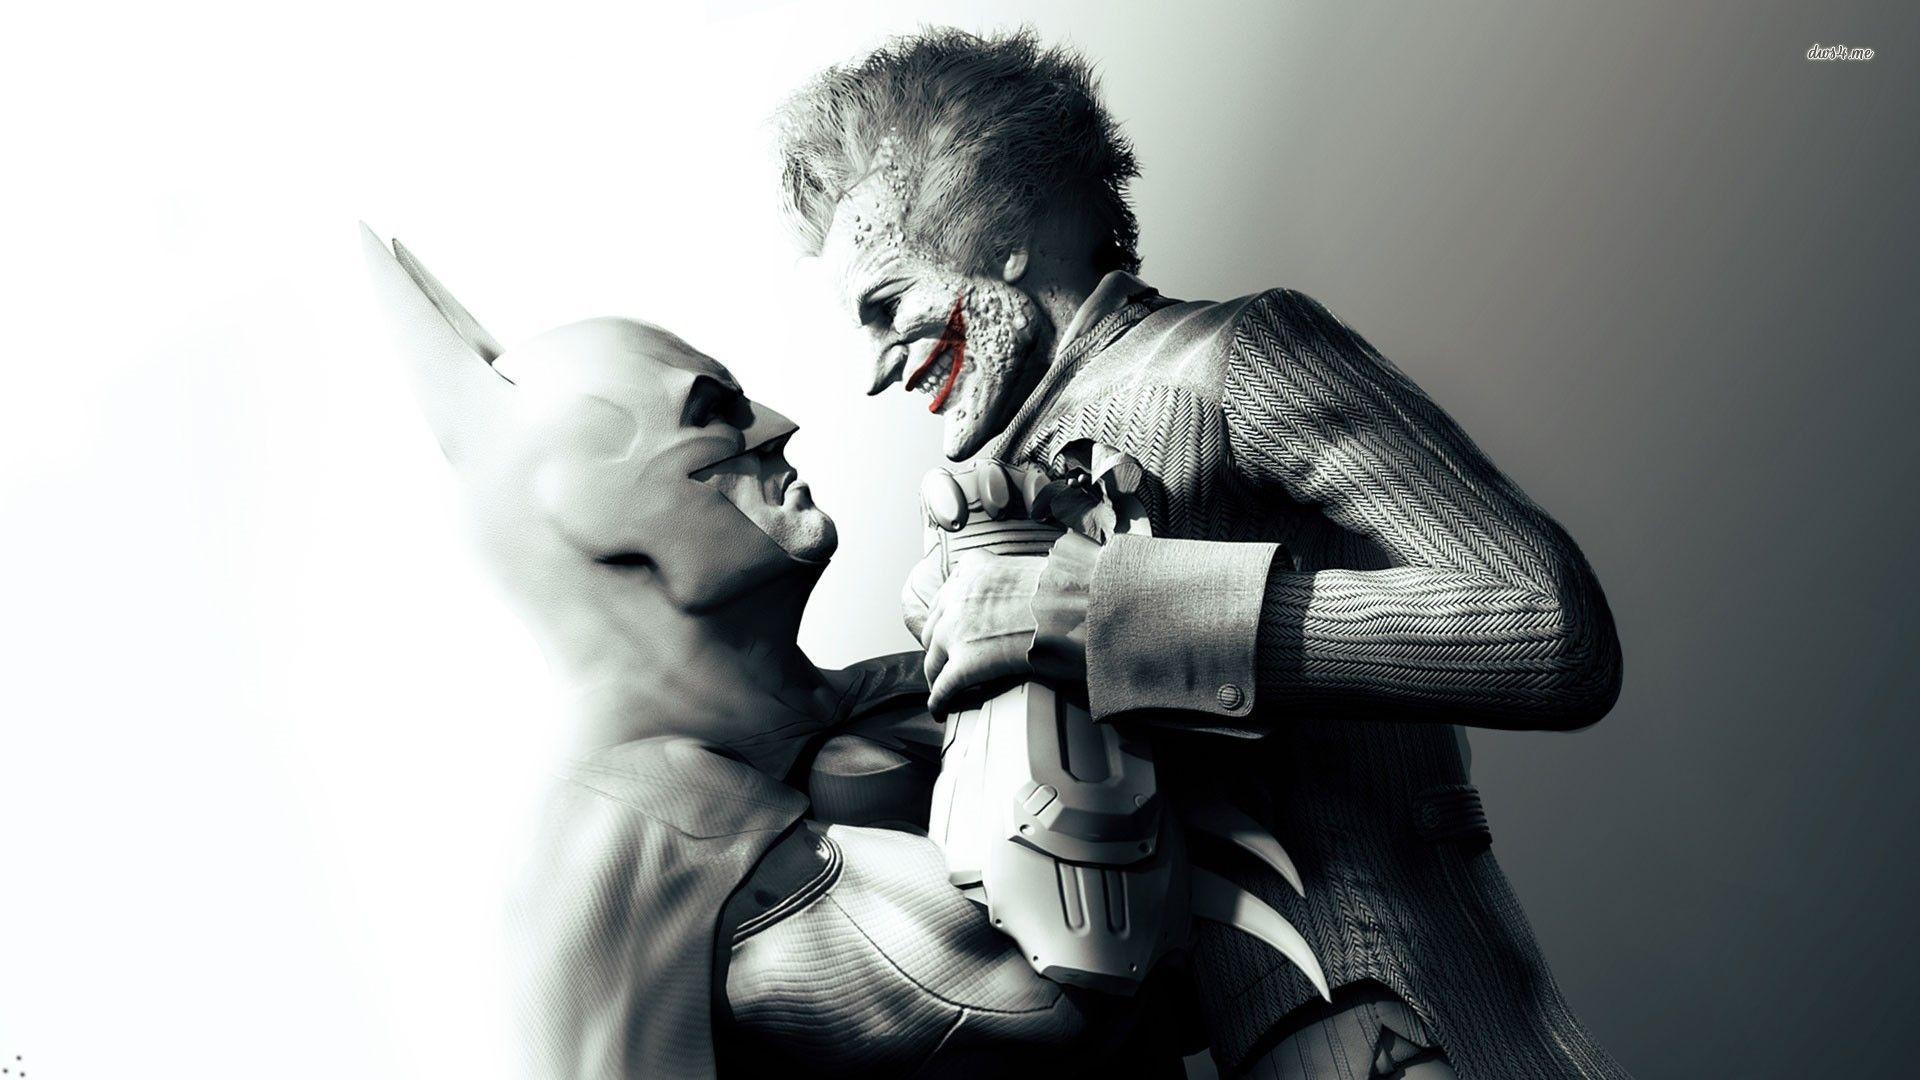 Tons of awesome Batman vs Joker wallpapers to download for free. 